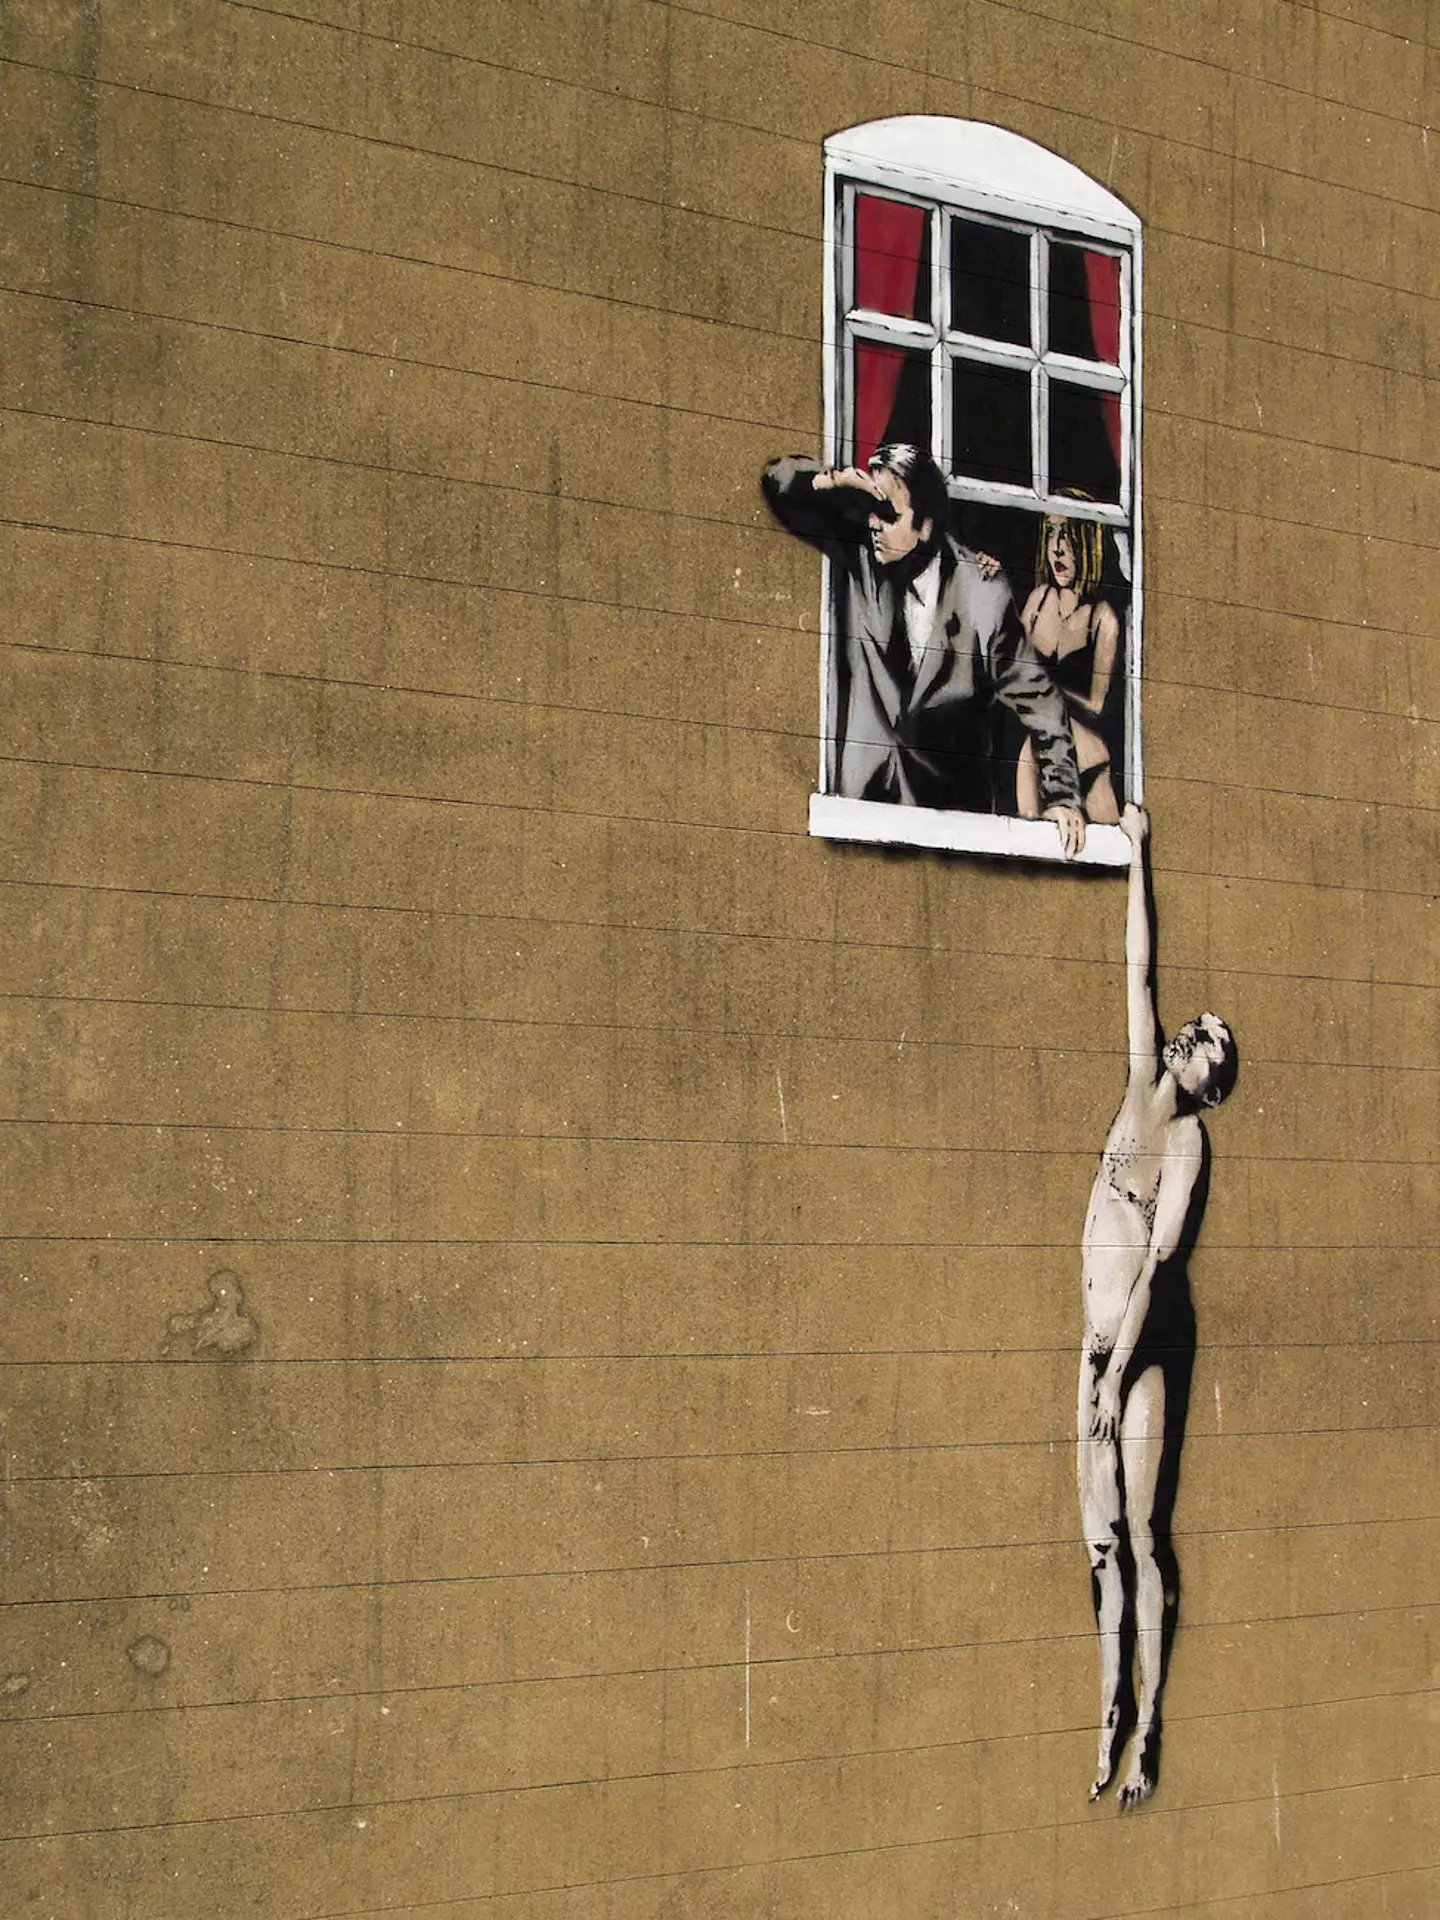 A graffiti design by the mysterious Banksy in Bristol, England.